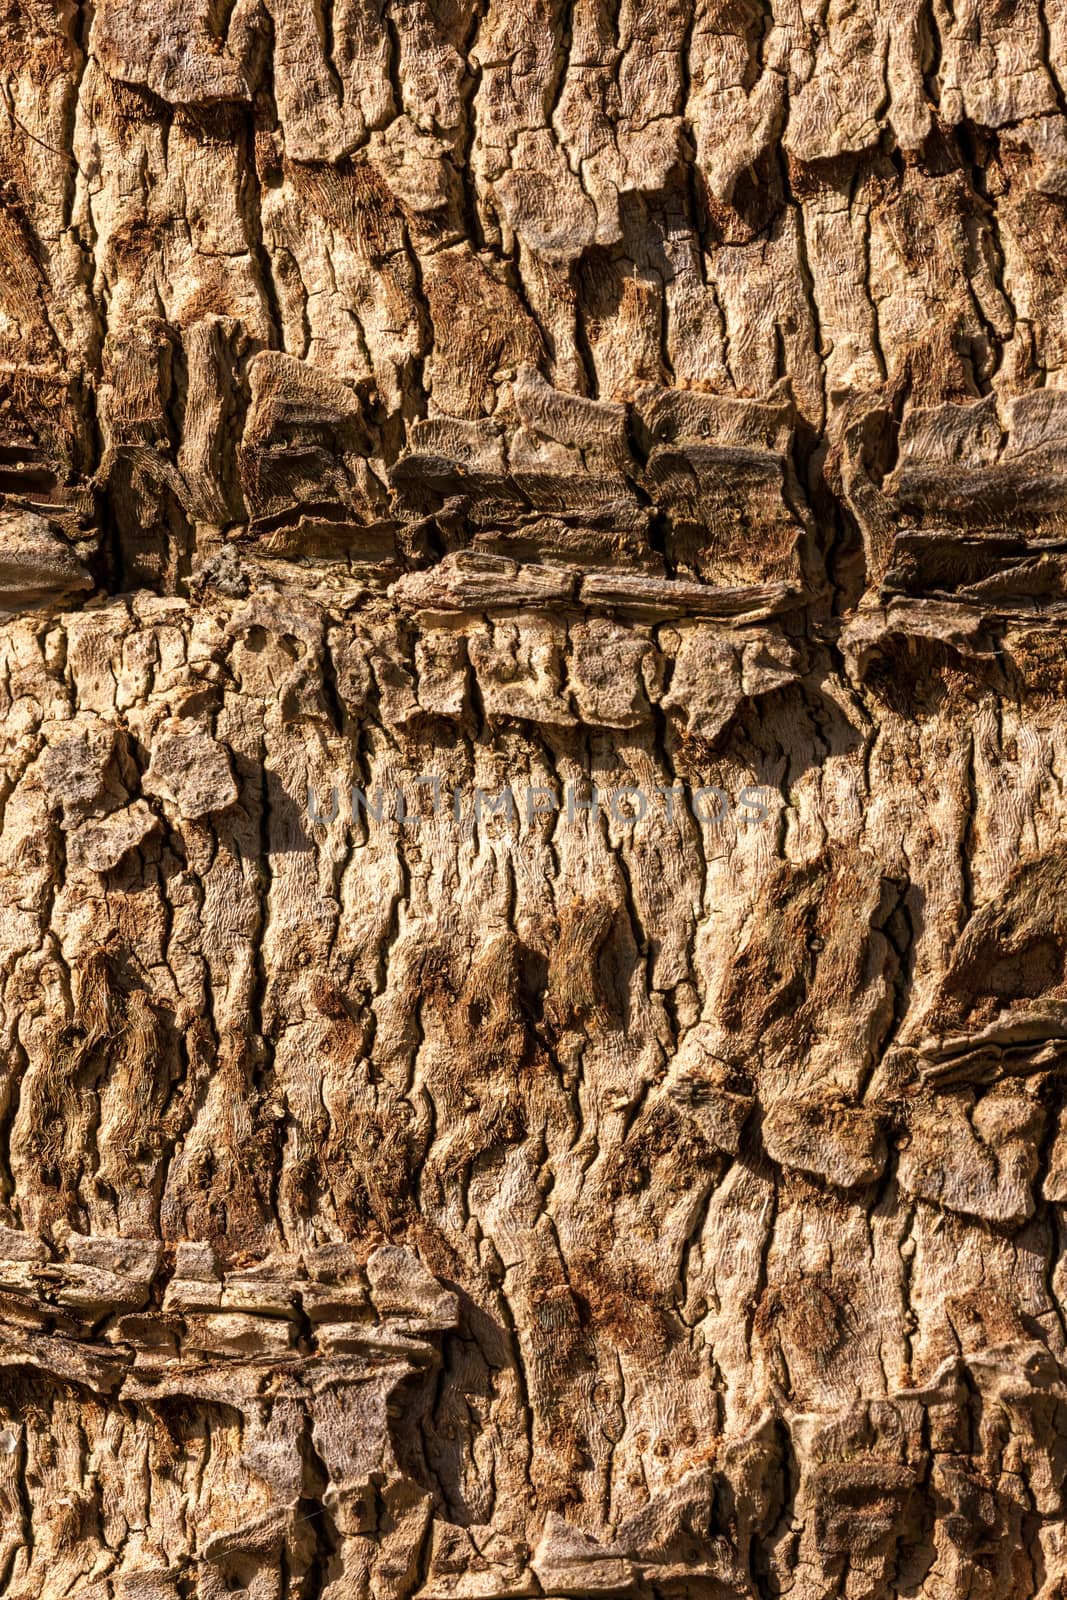 The tree bark as a natural  background